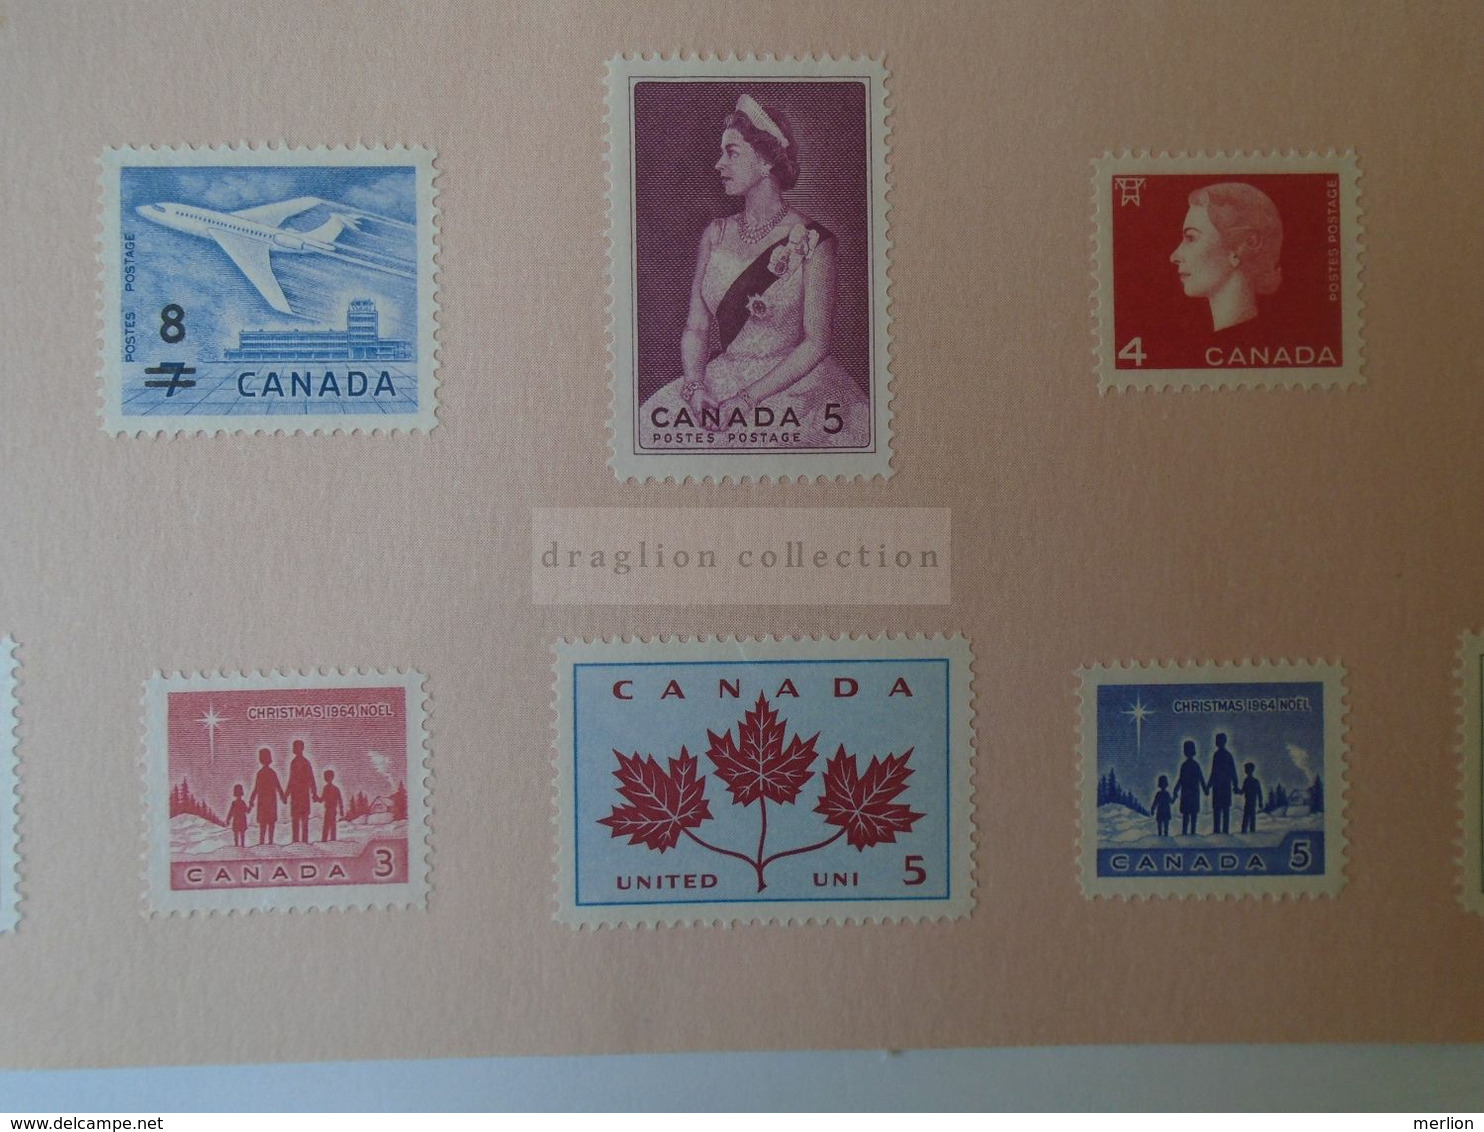 J1218   Canada 1964  Lot Of  2  Souvenir Cards  With Stamps Attached   1964/65 - Annuali / Merchandise